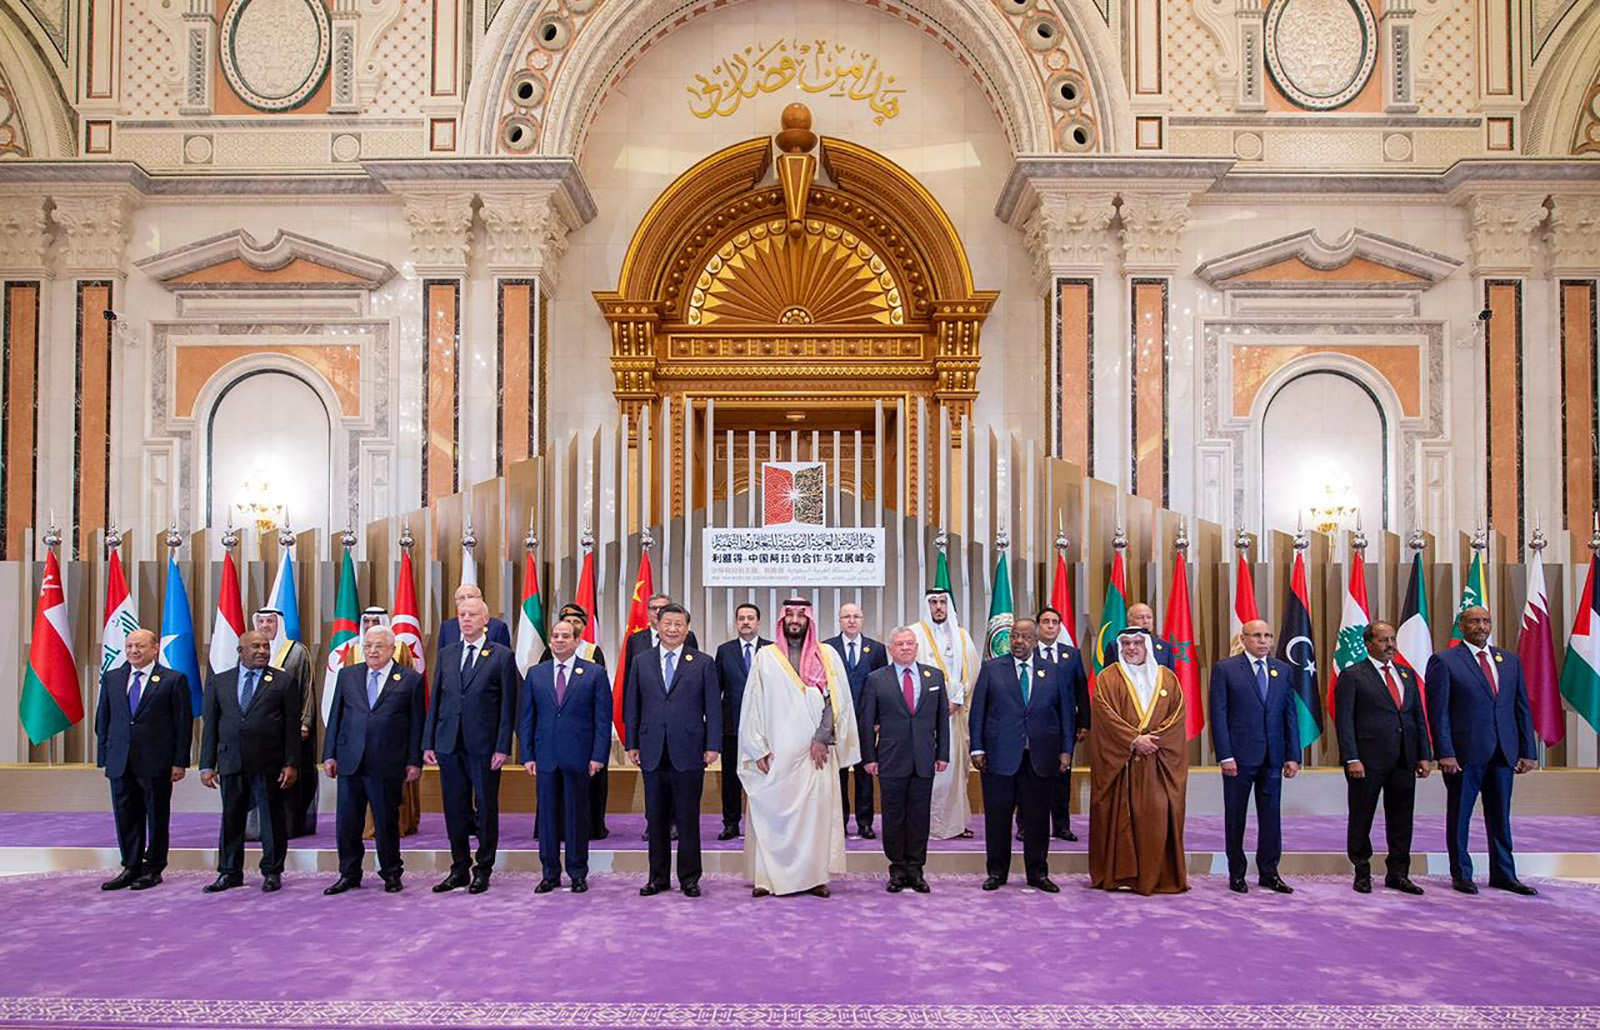 Chinese President Xi Jinping, center left, and Arab leaders pose for a group photo during the China-Arab summit in Riyadh, Saudi Arabia, on December 9.